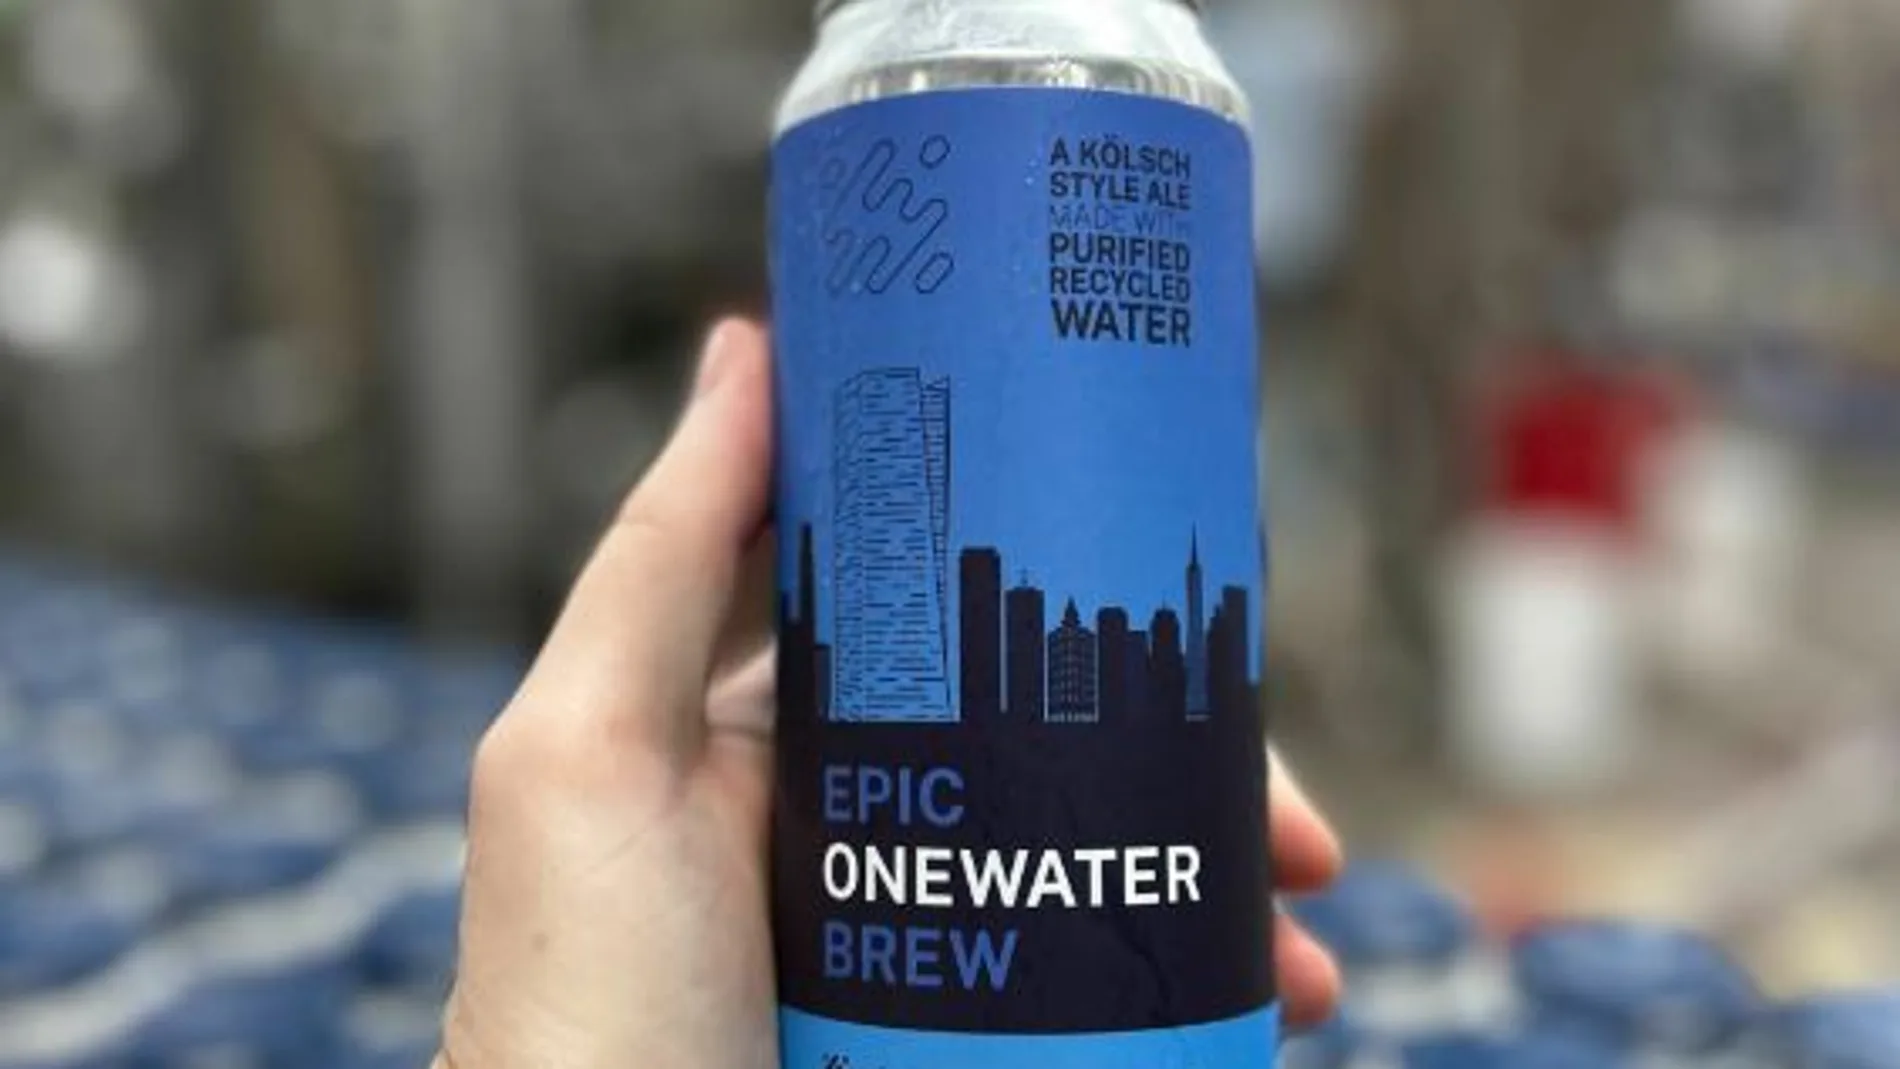  Epic OneWater Brew